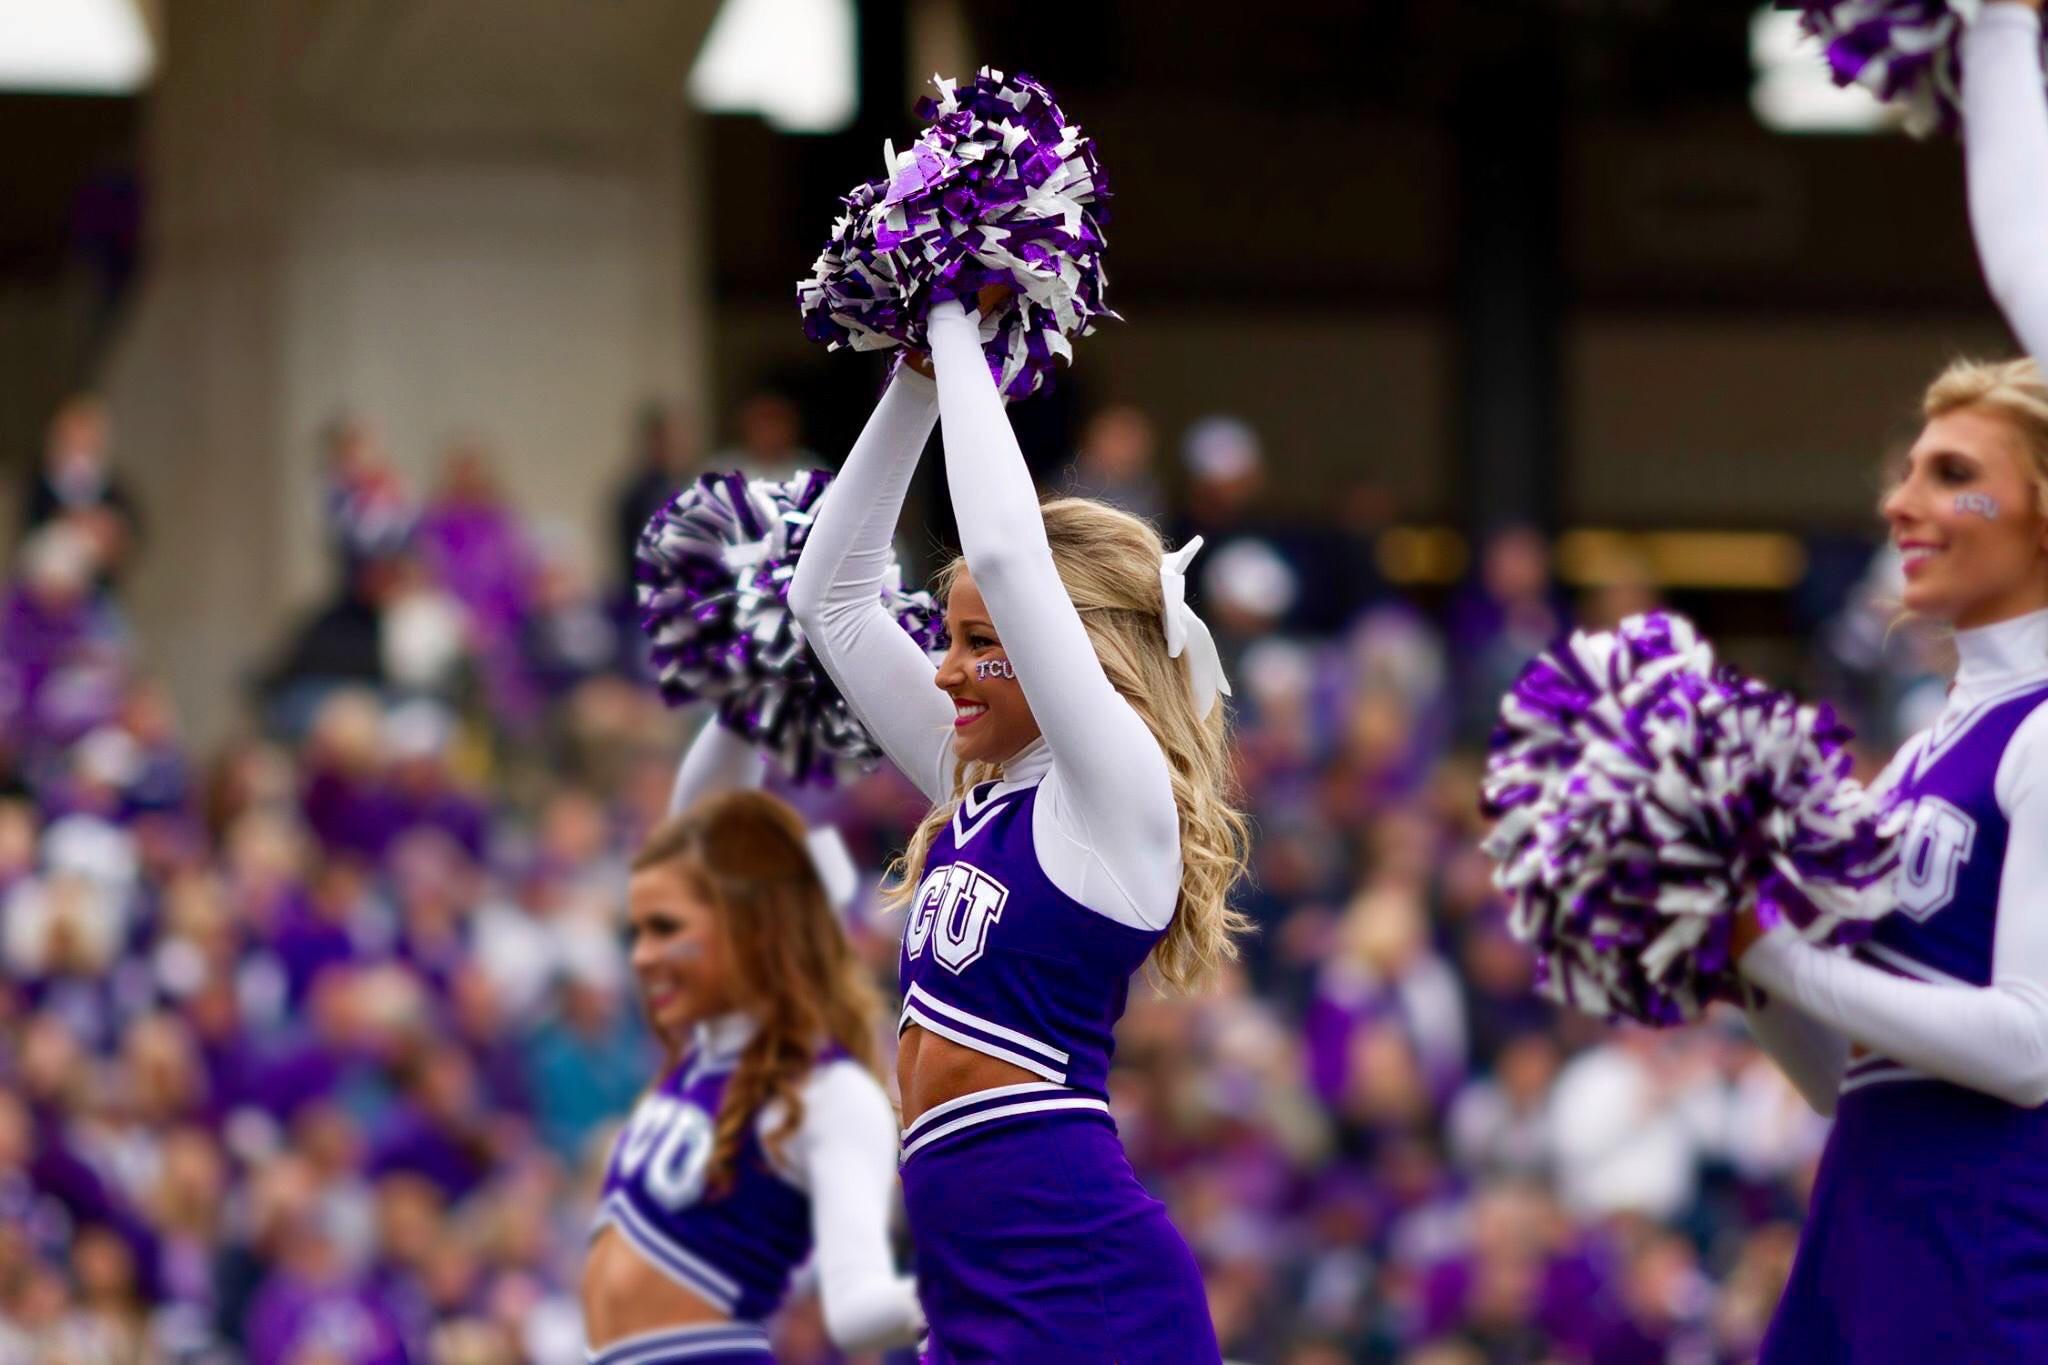 TCU+cheerleader+has+five+times+the+amount+of+Twitter+followers+as+senior+quarterback+Trevone+Boykin+and+double+the+amount+of+TCU+football+head+coach+Gary+Patterson+due+to+her+status+as+a+cheerlebrity.+